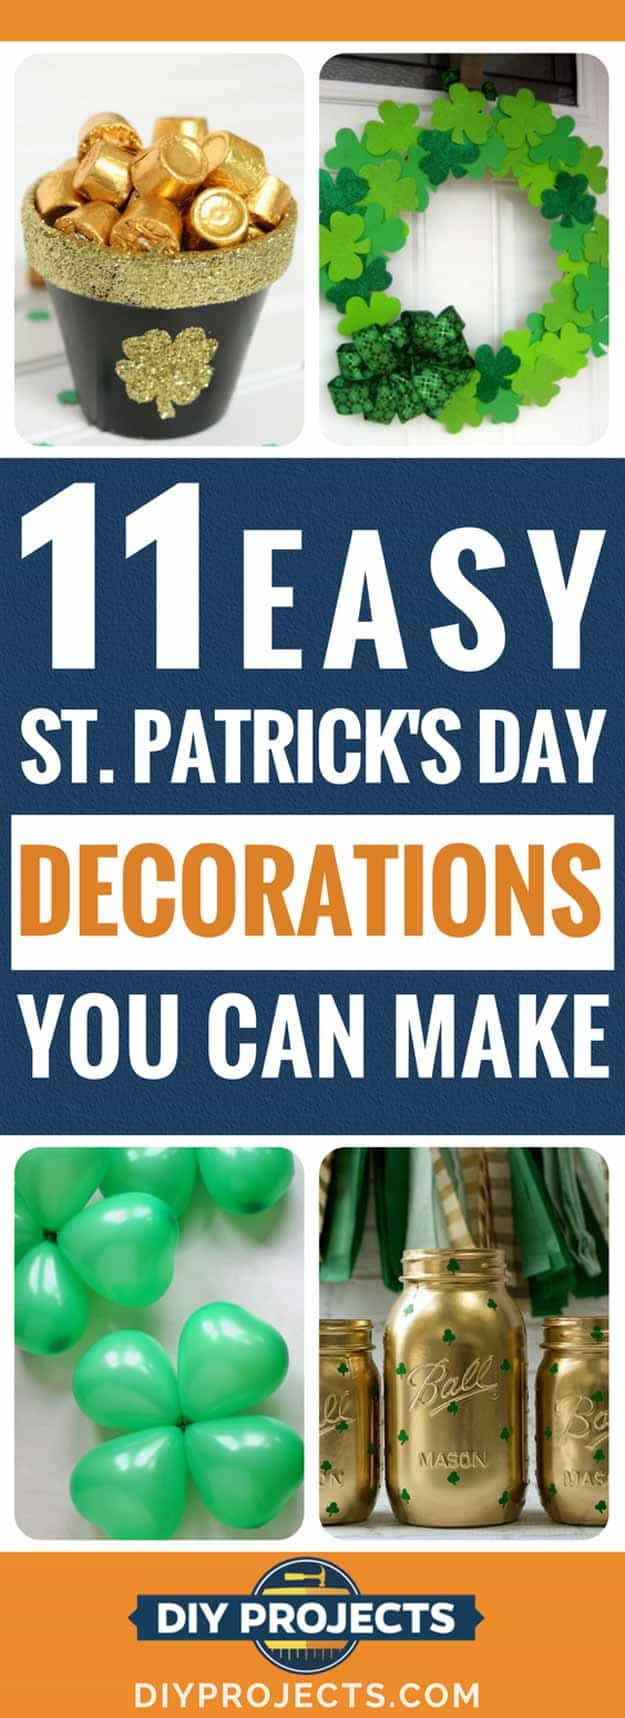 St Patrick's Day Decorations Diy
 St Patrick’s Day Decorations DIY Projects Craft Ideas